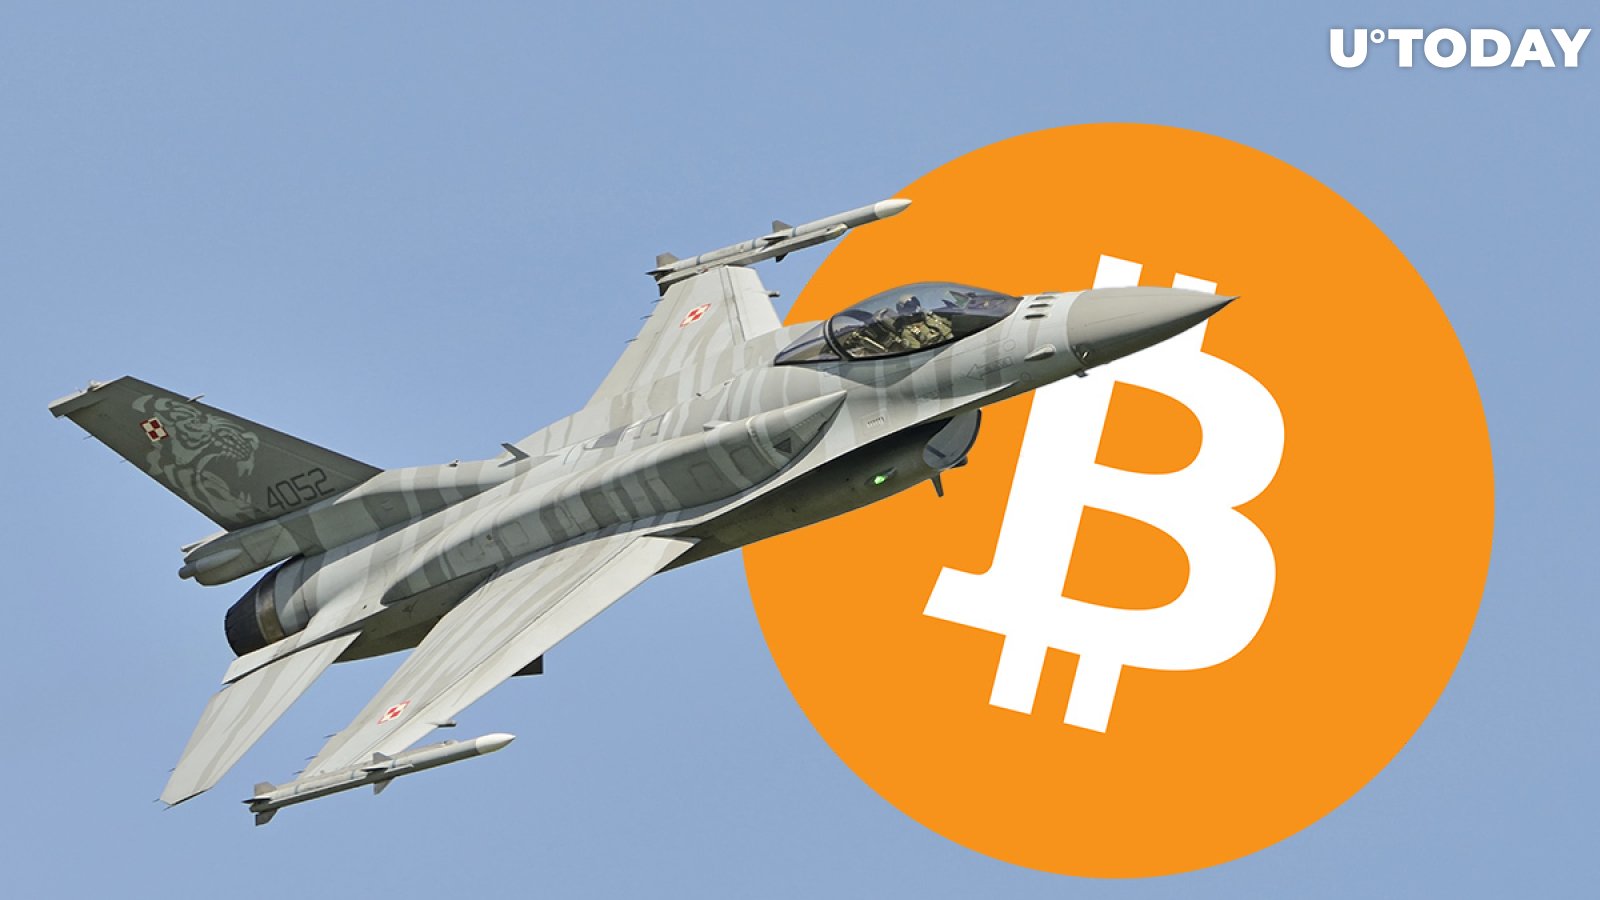 Almost 200 PCs for Bitcoin Mining Stolen from NATO Air Force Base